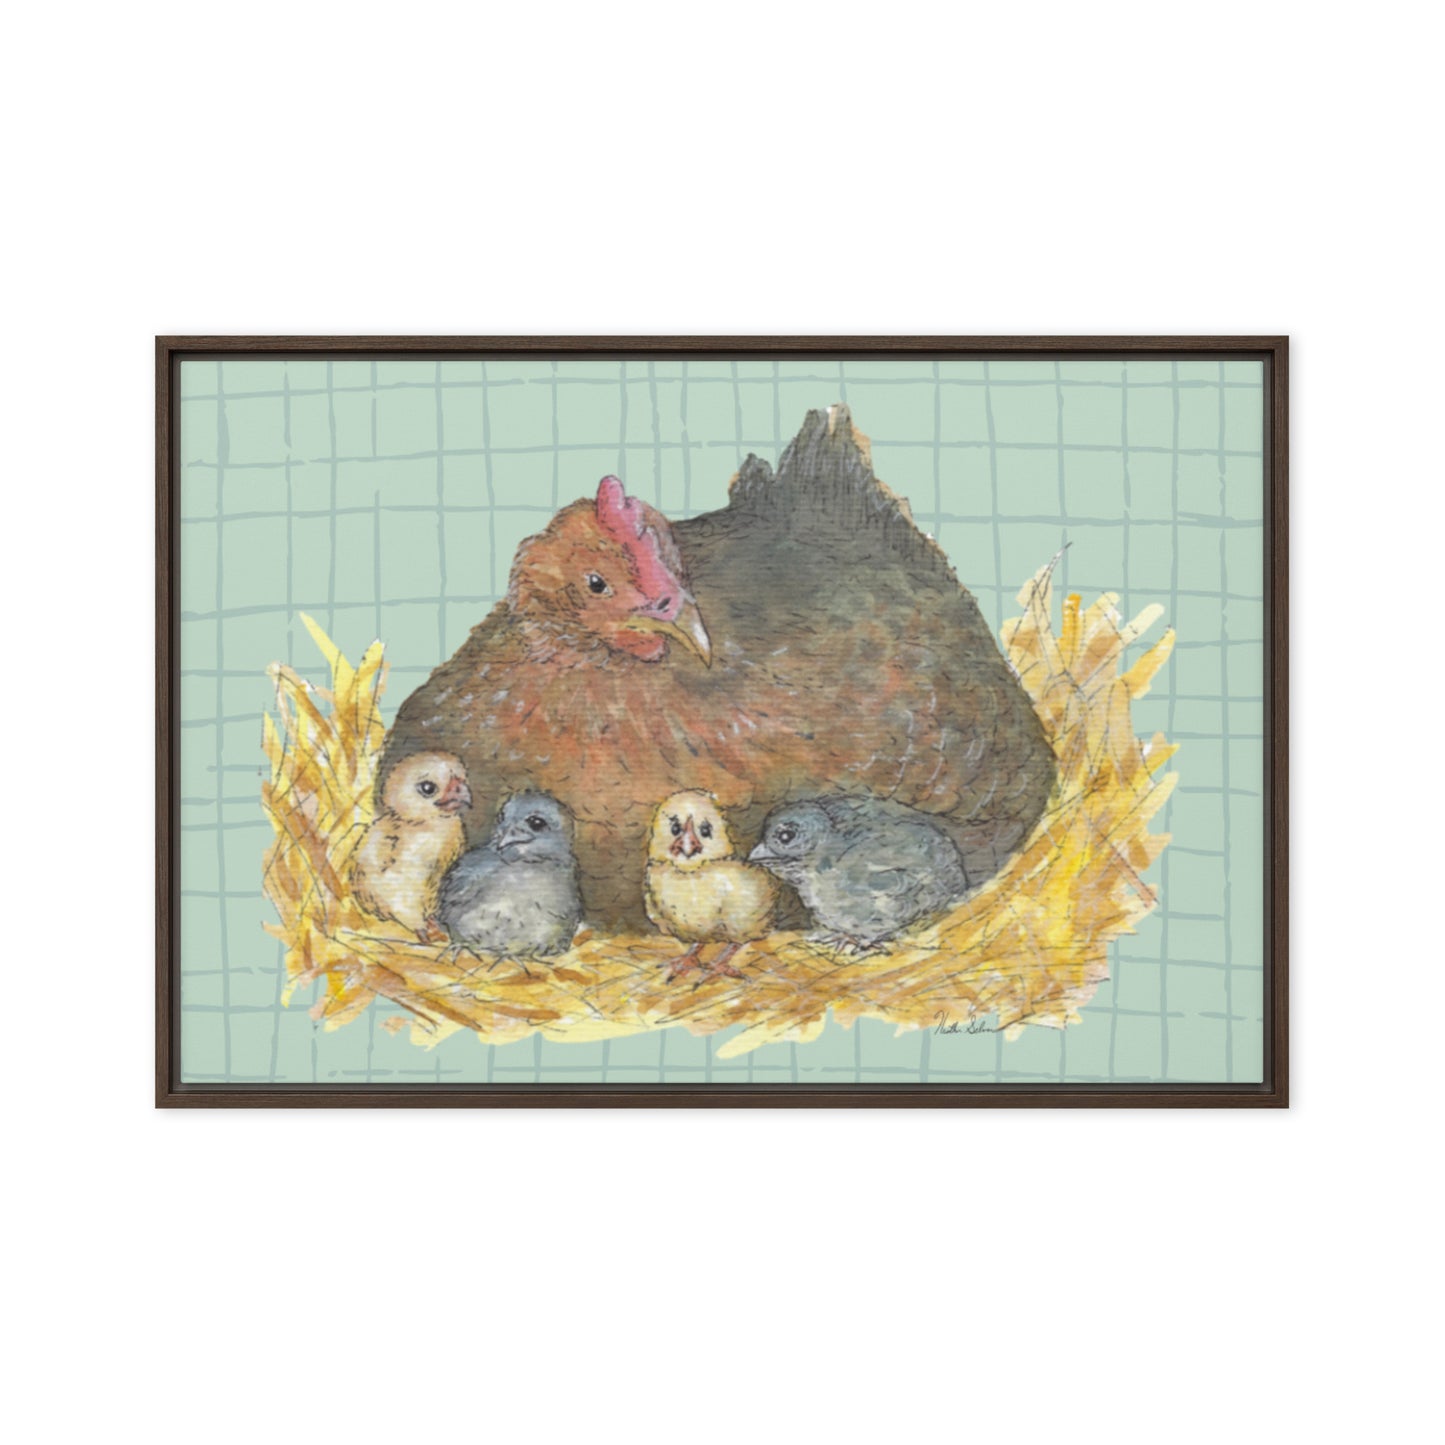 24 by 36 inch Mother Hen Floating Frame Canvas Wall Art. Heather Silver's watercolor painting, Mother Hen, with a green crosshatched background, printed on a stretched canvas and framed with a dark brown pine frame. Hanging hardware included.